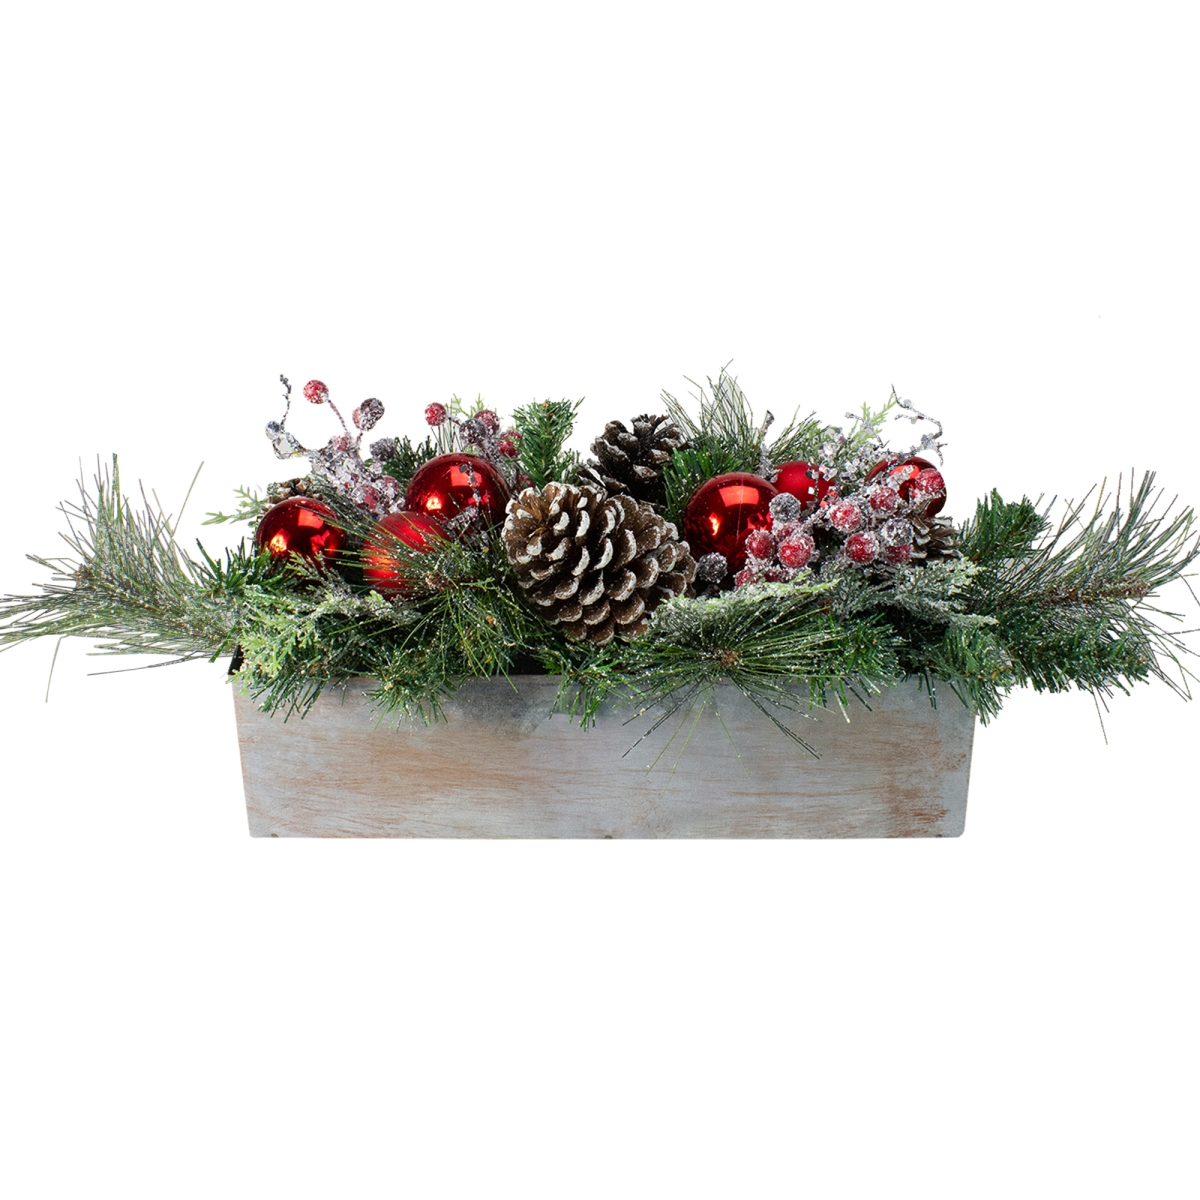 Picture of Gordon Companies 33532684 26 in. Mixed Pine Ornament Pine Cone & Berry Artificial Christmas Arrangement in Galvanized Planter